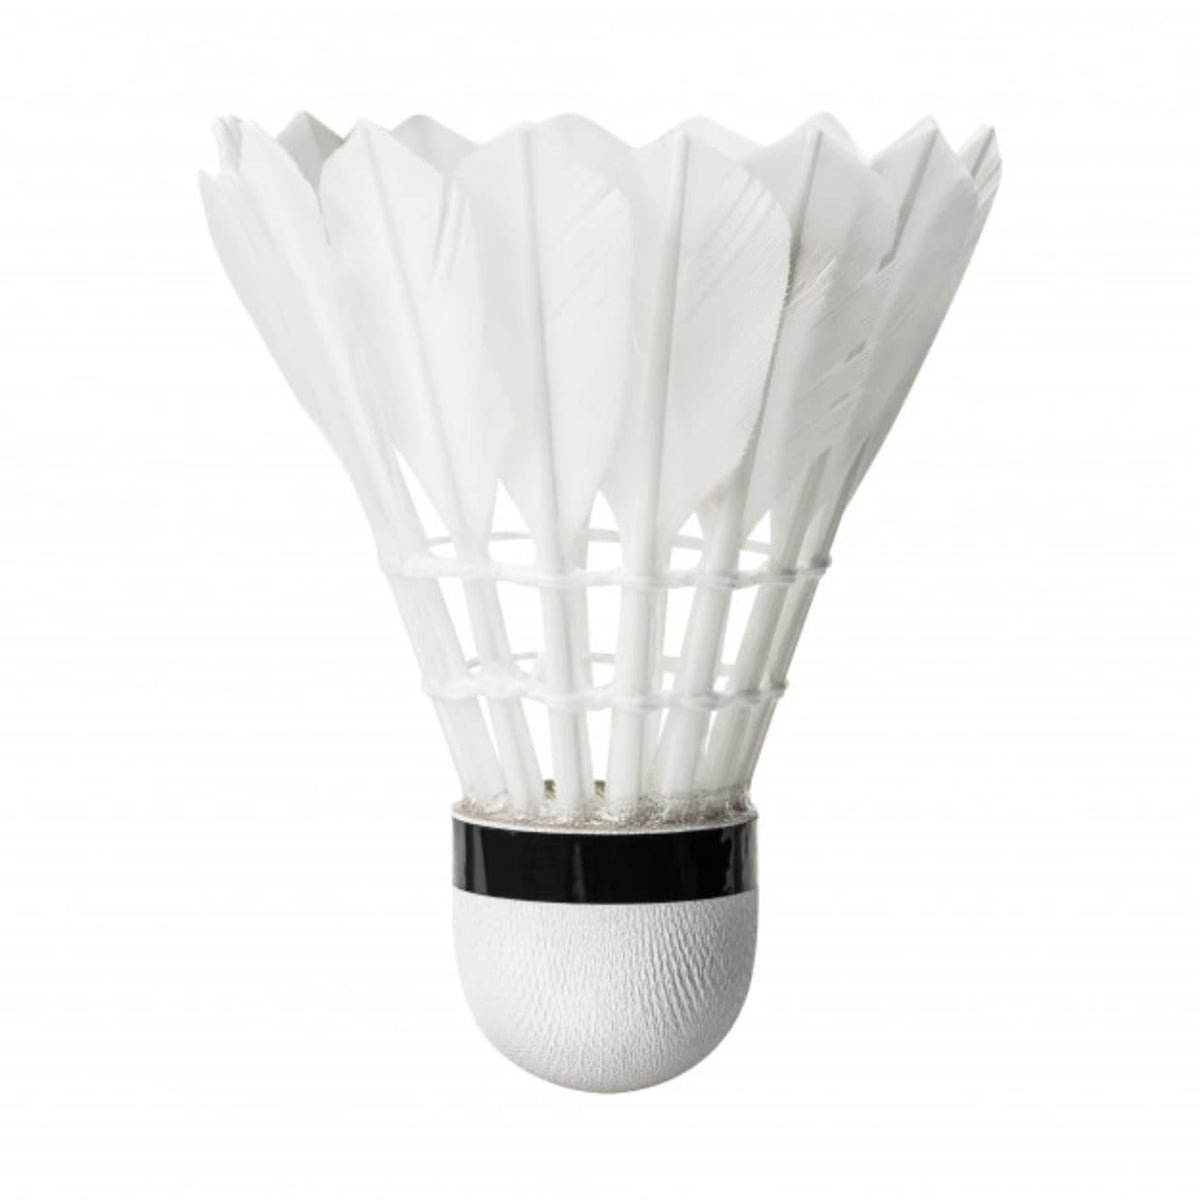 Vicky Gemini Feather Shuttlecock, White (Pack of 10)